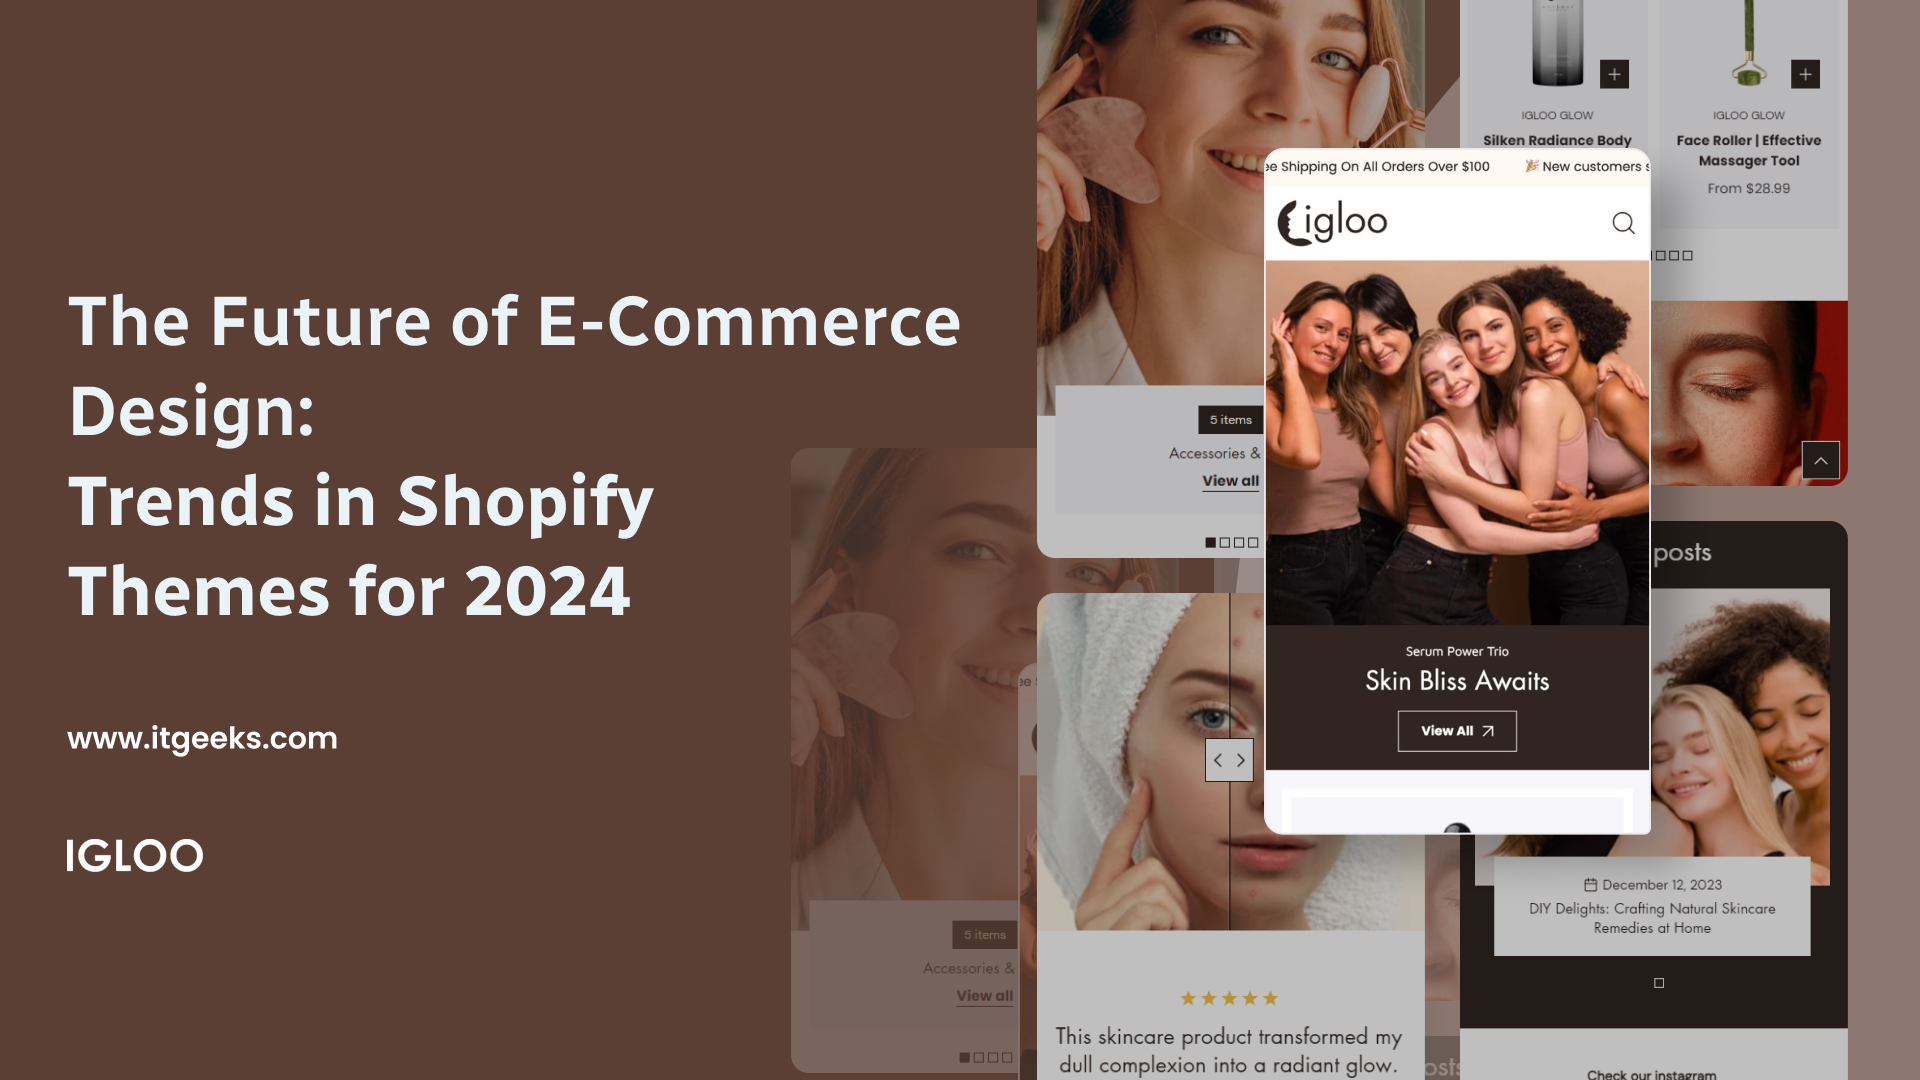 The Future of E-Commerce Design: Trends in Shopify Themes for 2024